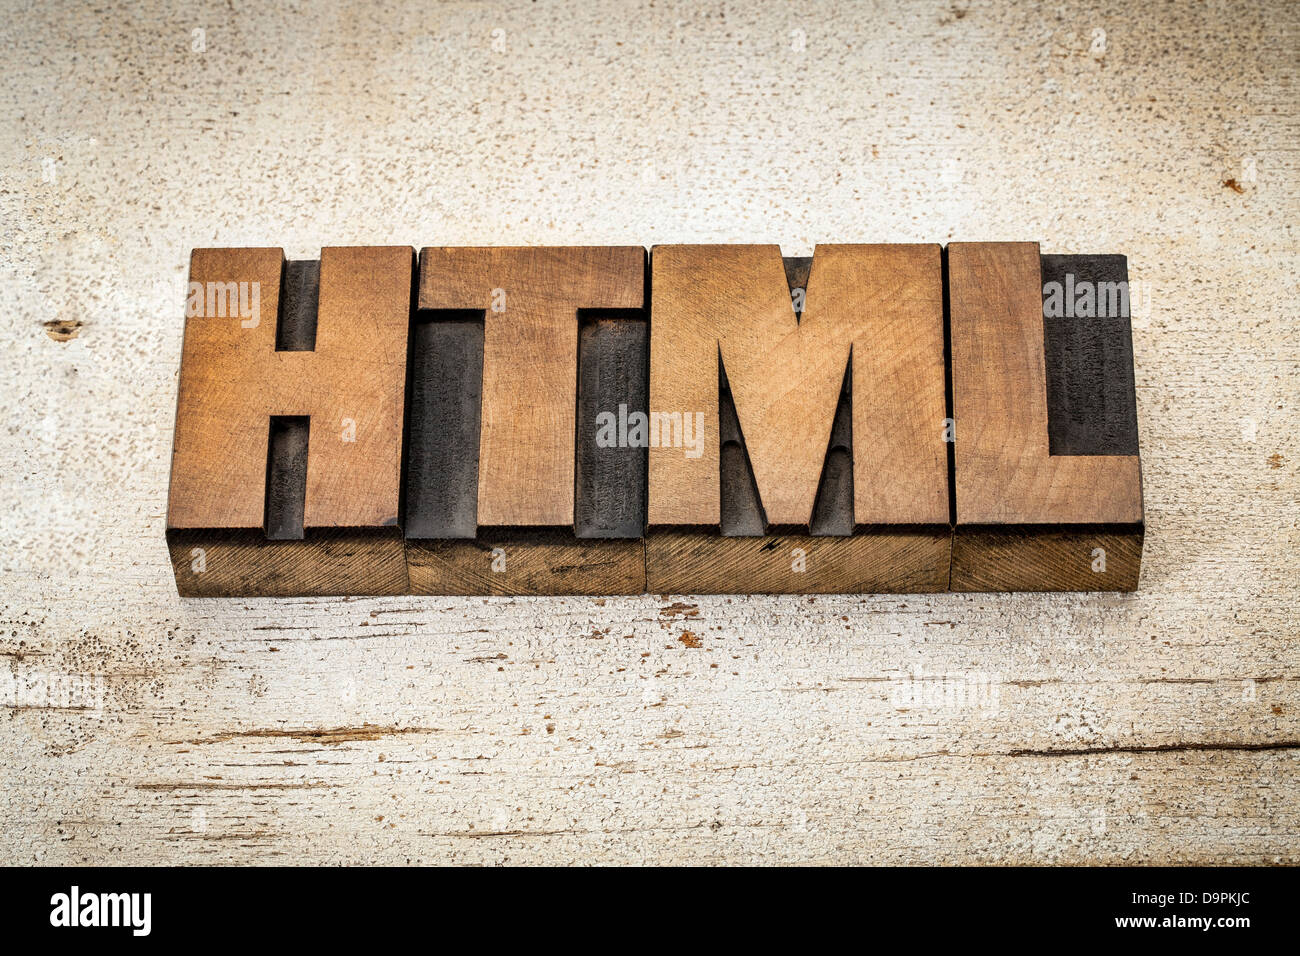 html (hyper text markup language) acronym - a word in vintage letterpress wood type on a grunge painted barn wood background Stock Photo